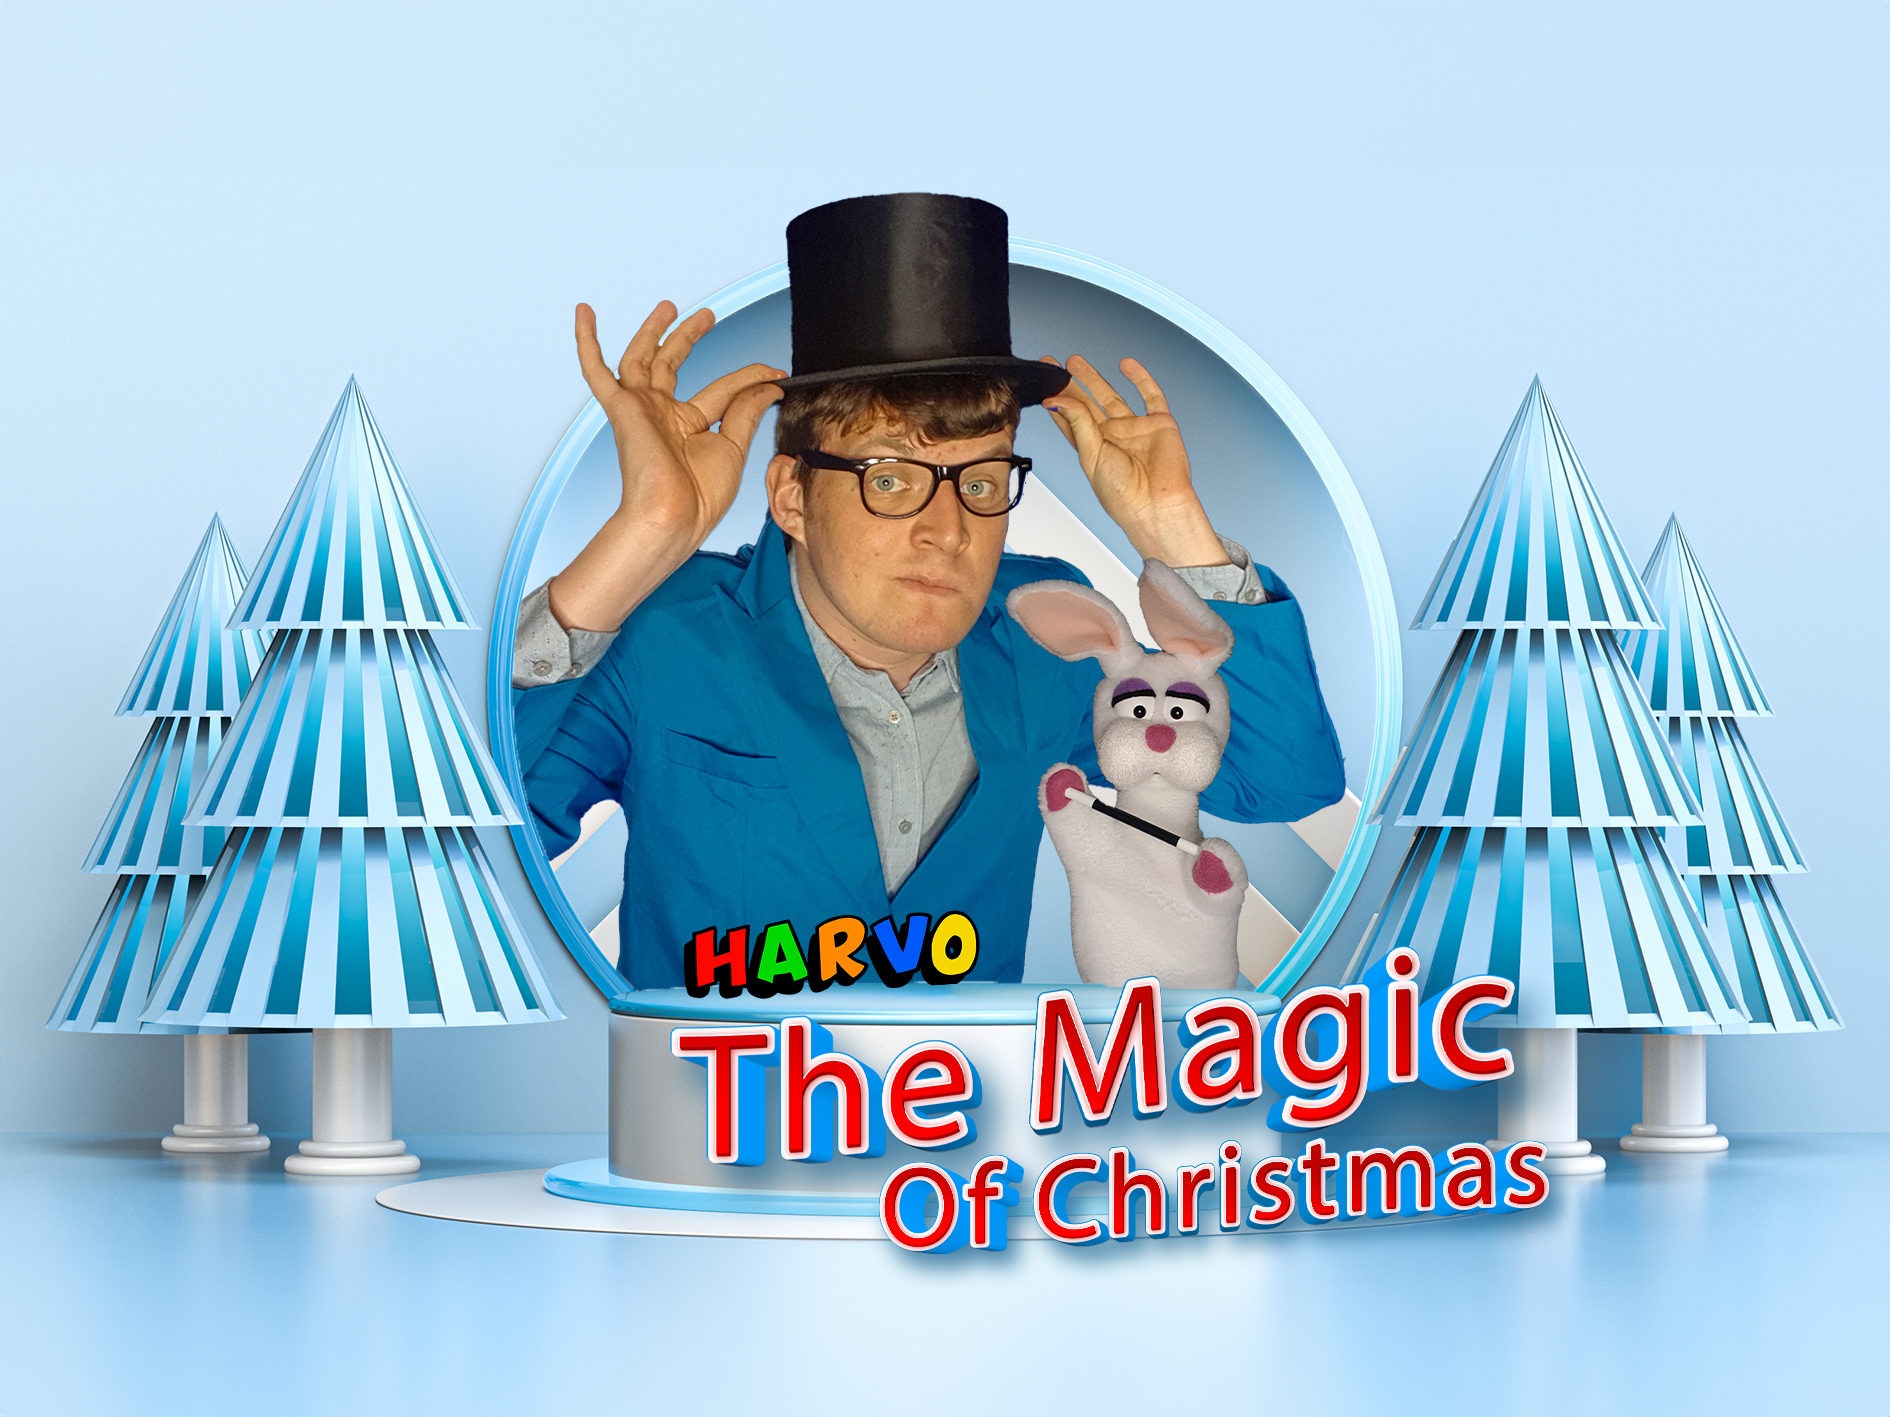 Harvo and Flopper inside a Christmas themed cutout with text saying 'The Magic of Christmas' it also has 4 blue Christmas trees at the side